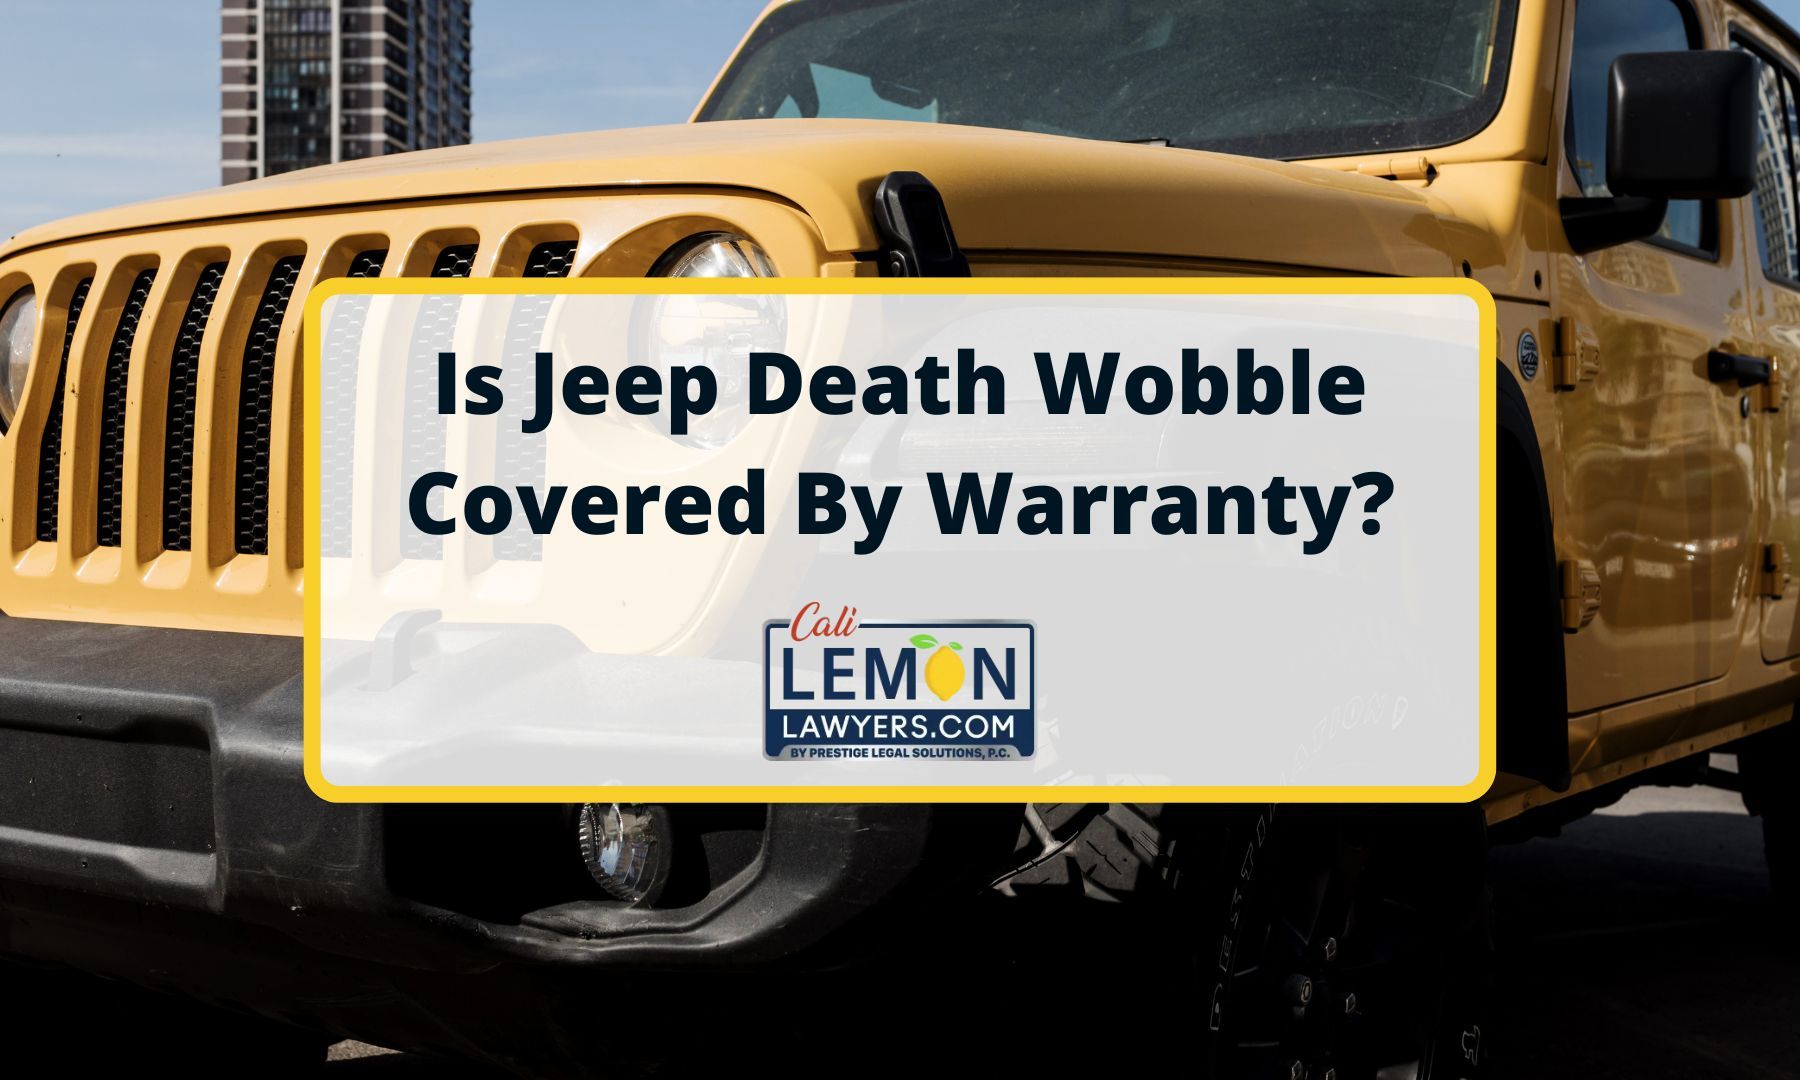 Is Jeep Death Wobble Covered By Warranty?